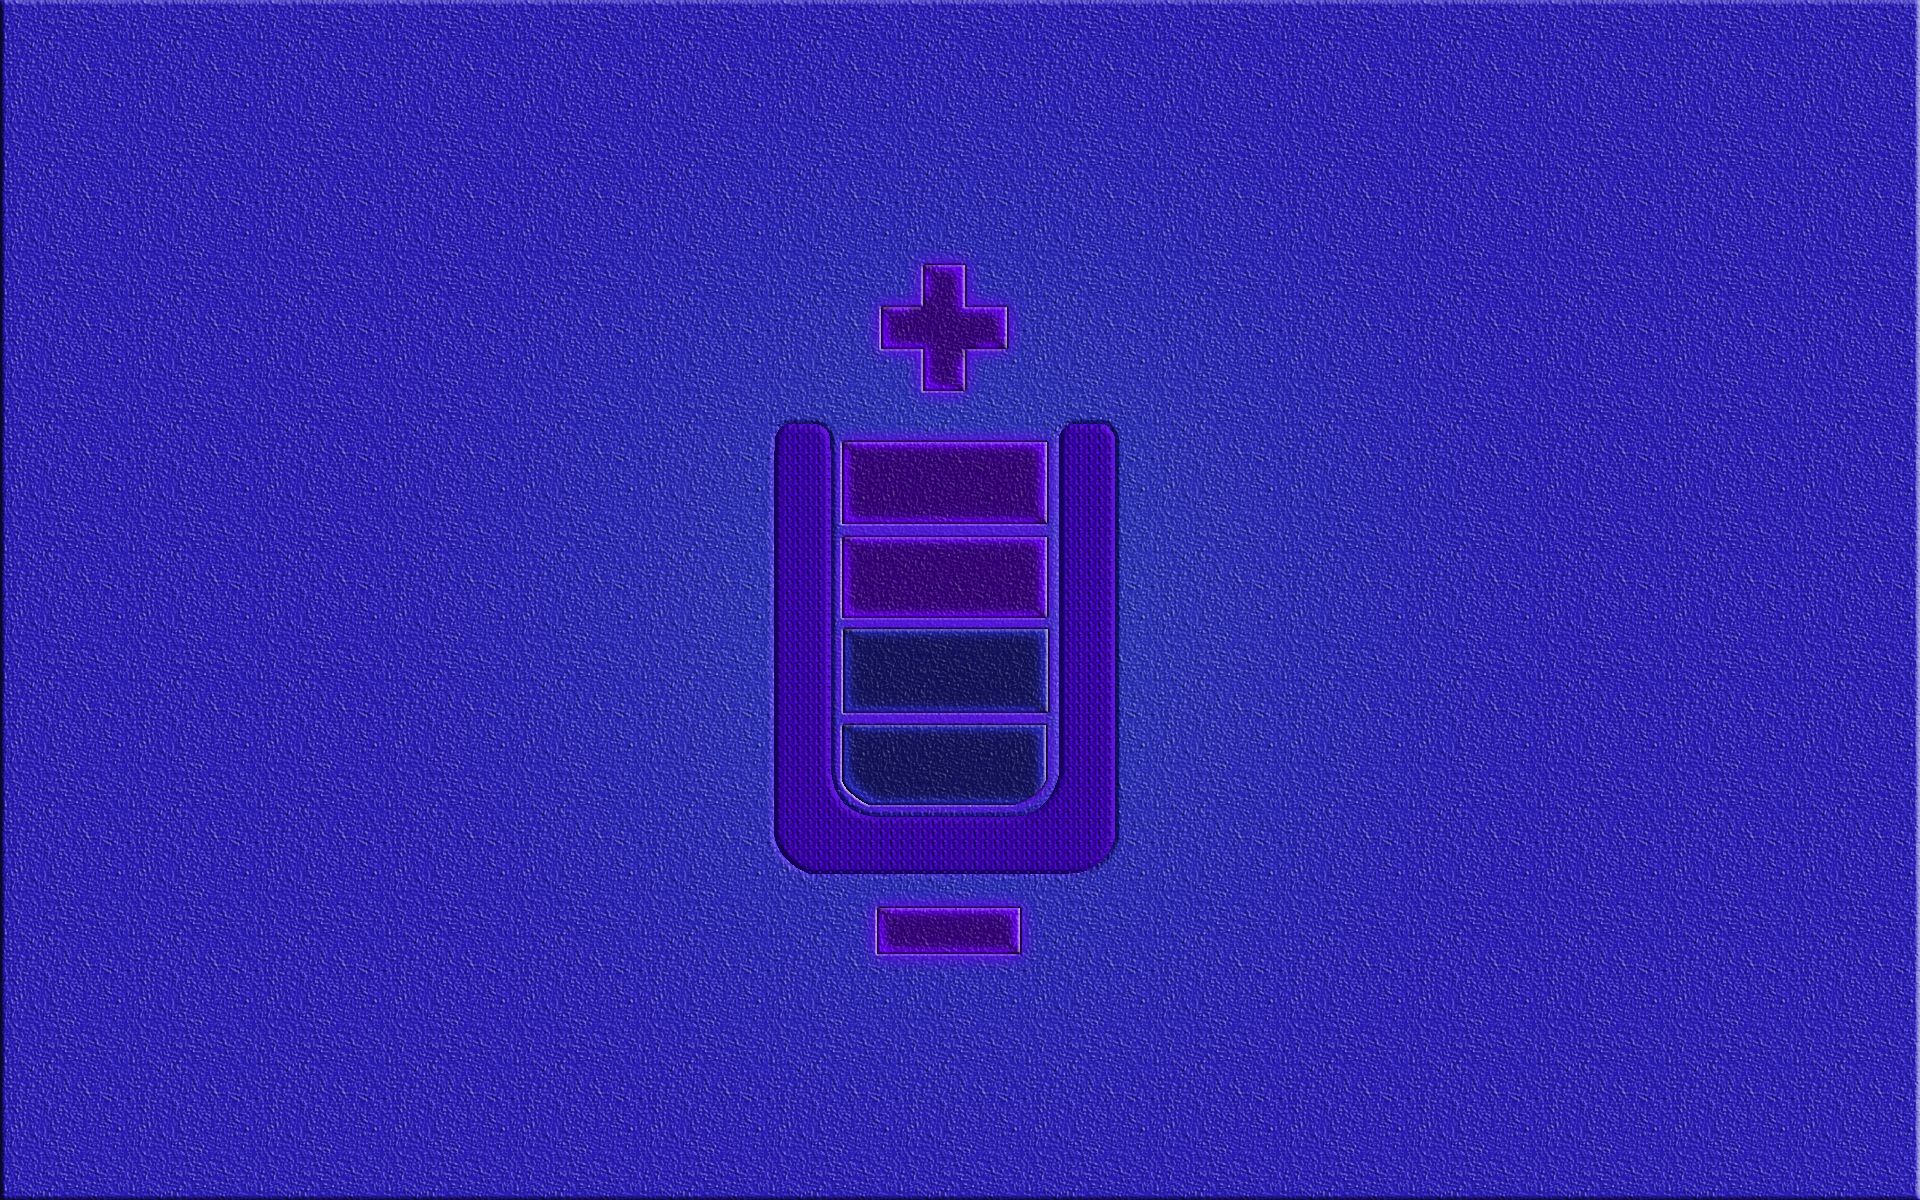 A purple battery icon on a blue background - Battery